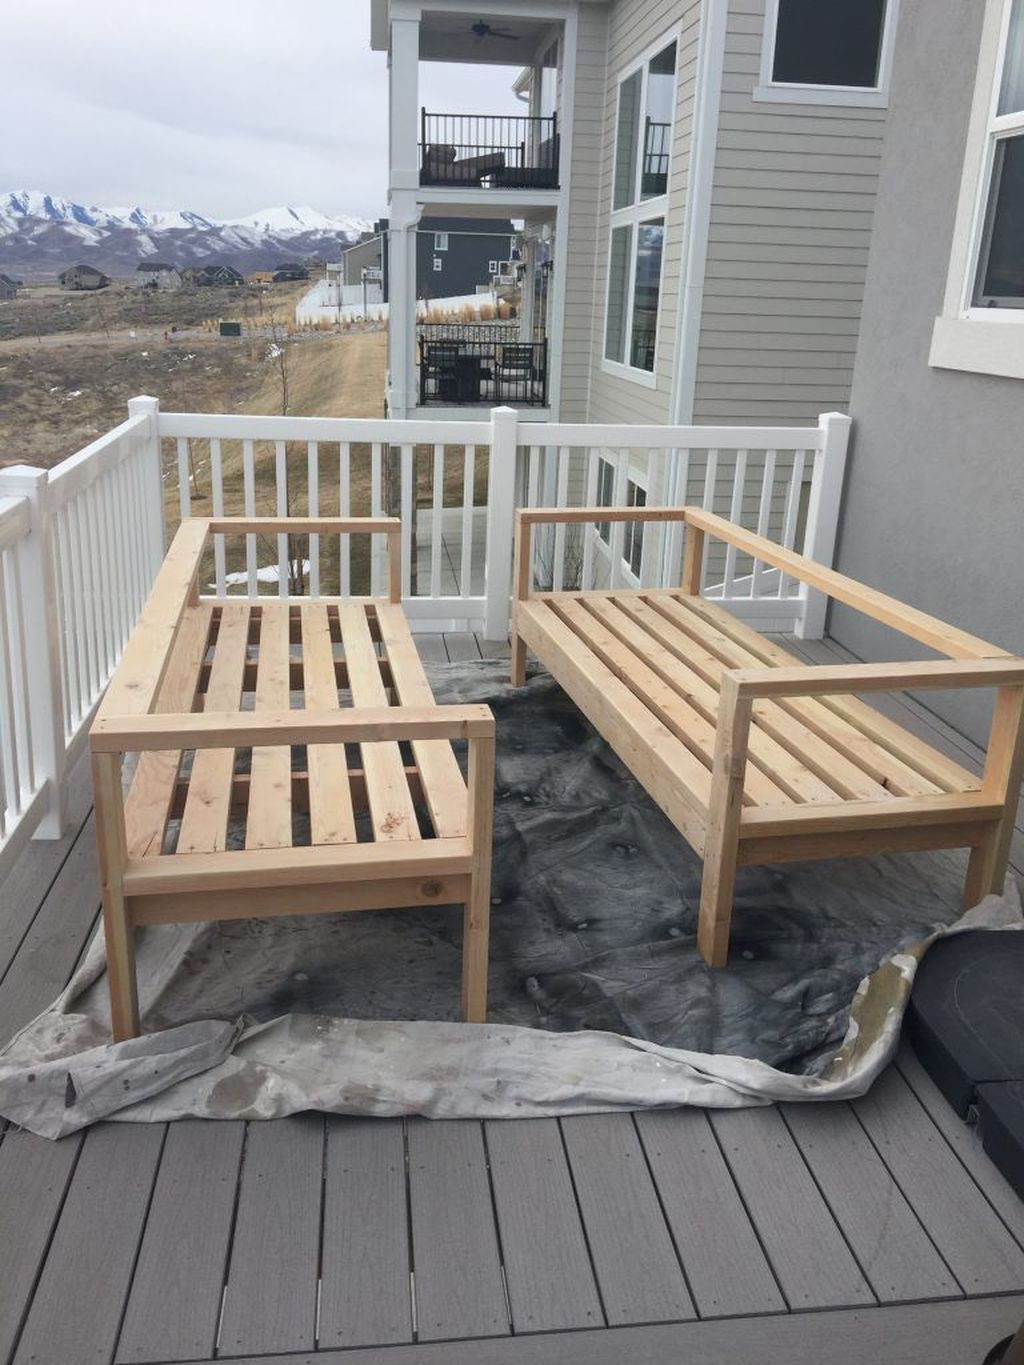 Awesome Diy Outdoor Furniture Project Ideas You Have Must See15